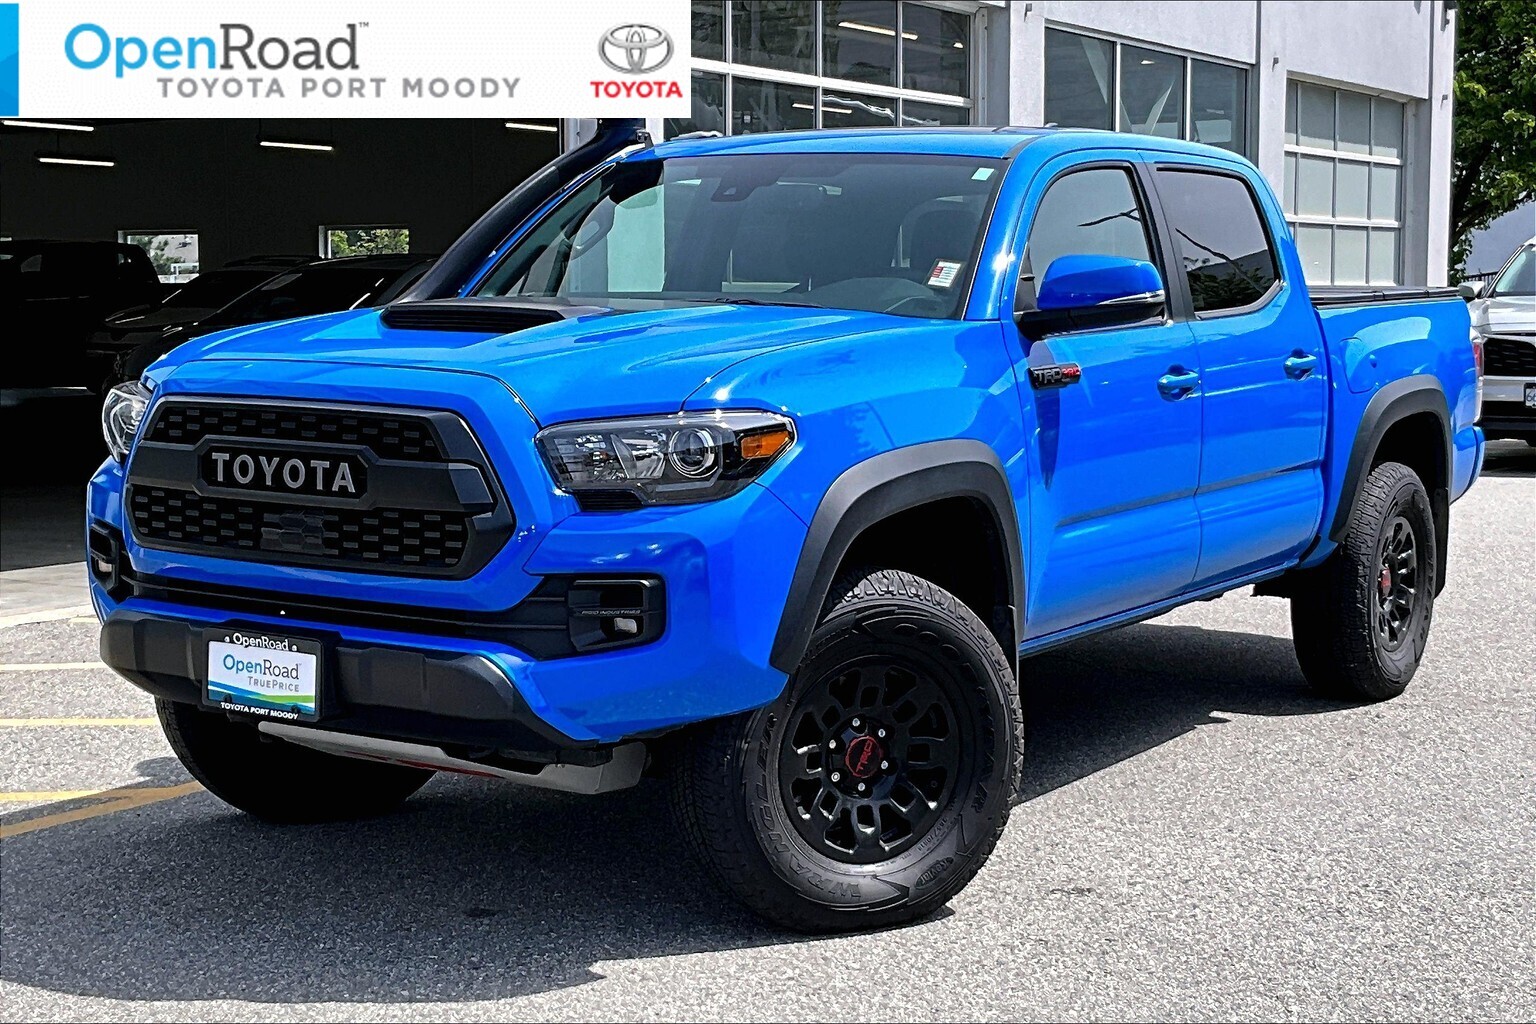 2019 Toyota Tacoma 4x4 Double Cab V6 TRD Off-Road 6A |OpenRoad True P